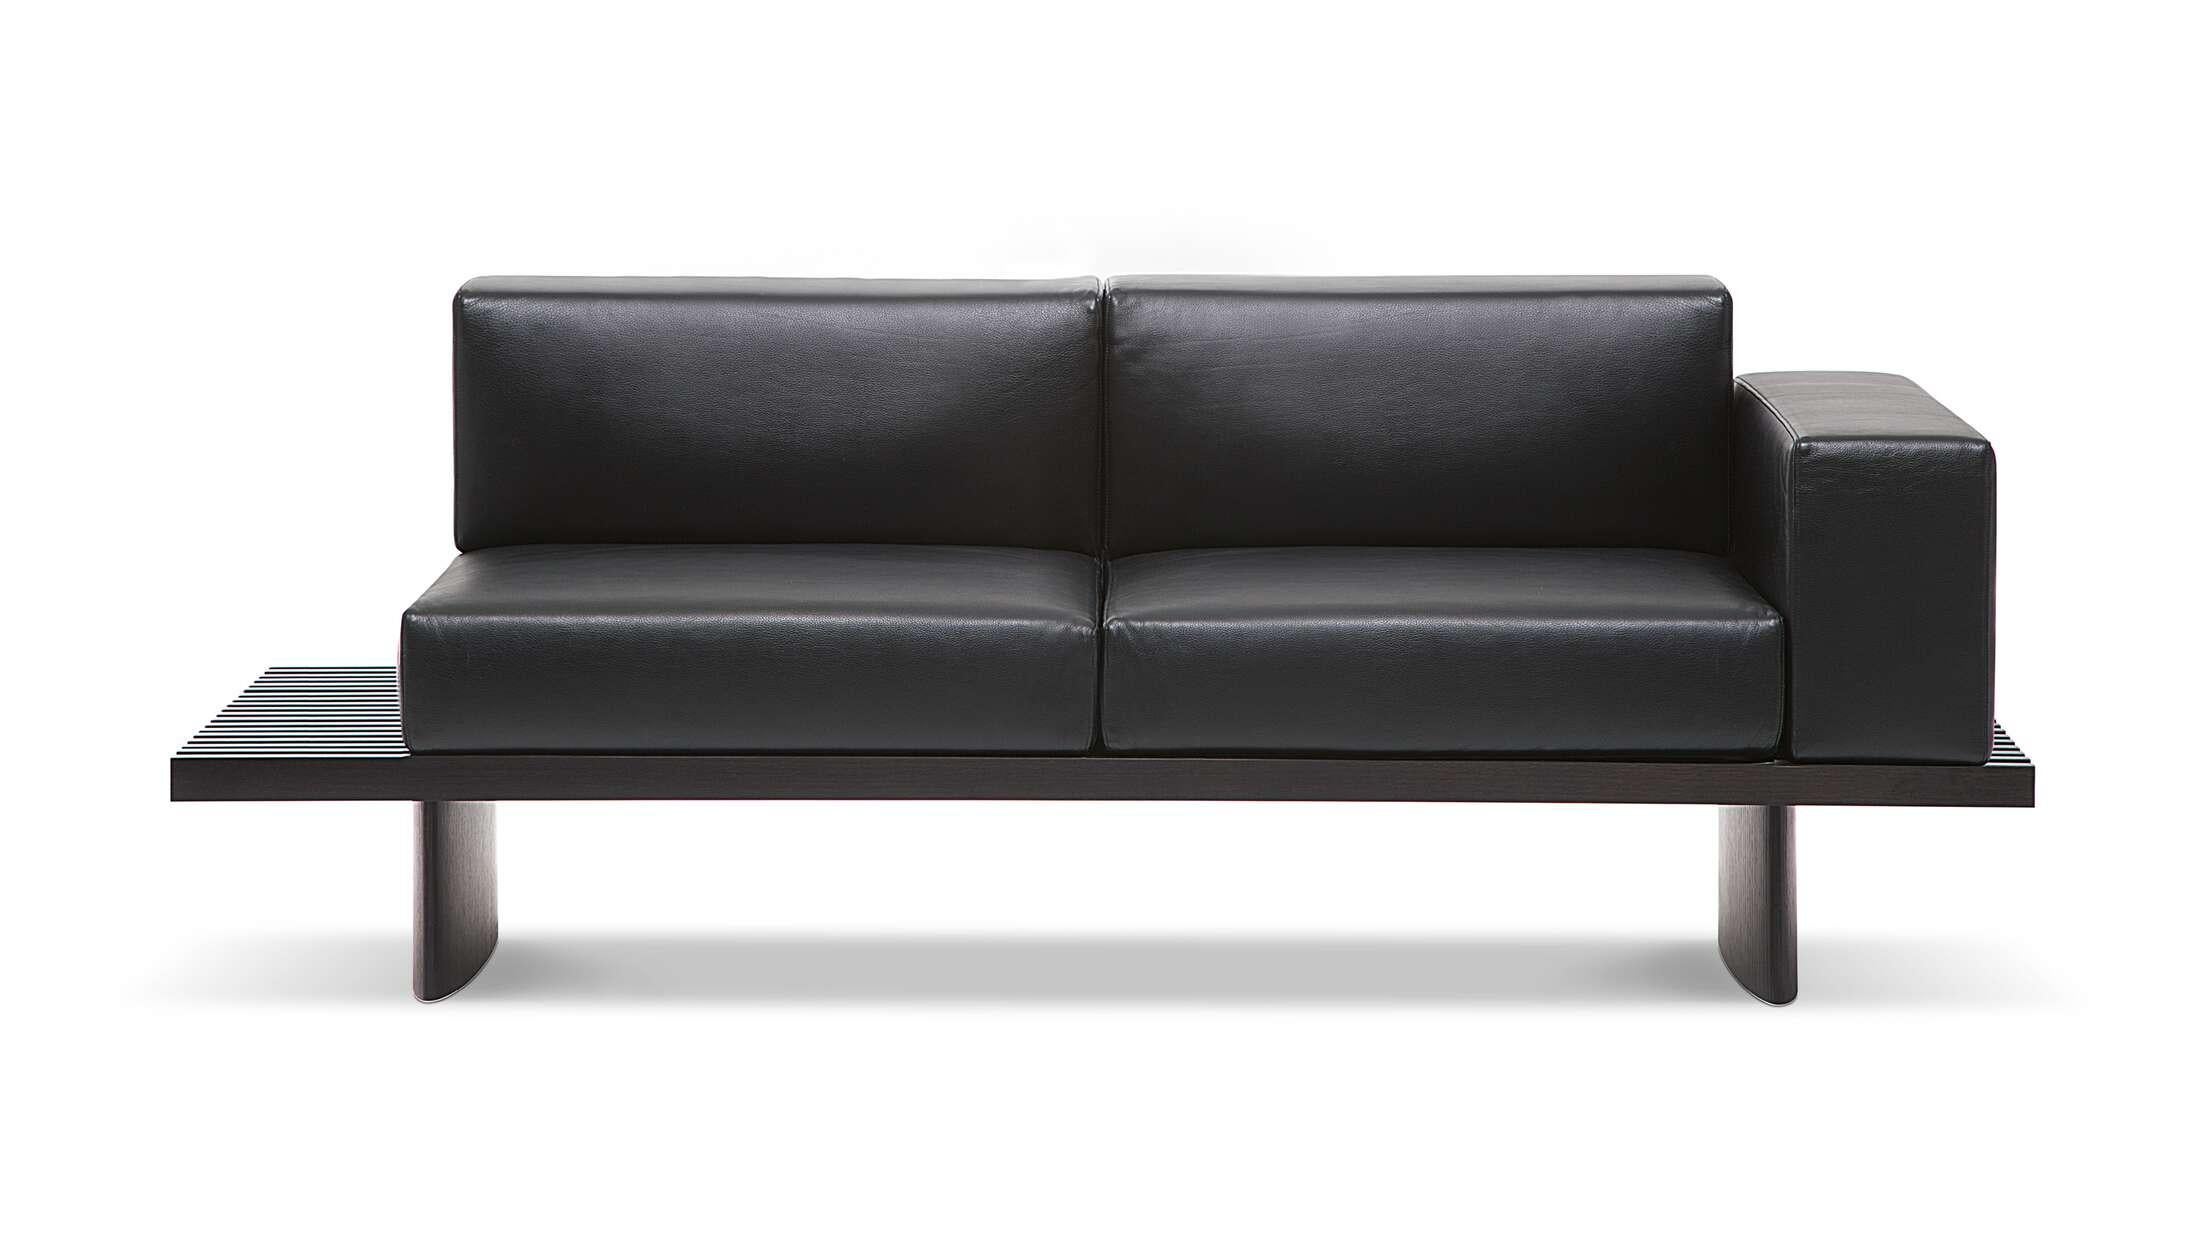 Italian Charlotte Perriand Refolo Sofa in Black Leather for Cassina, Italy - new For Sale